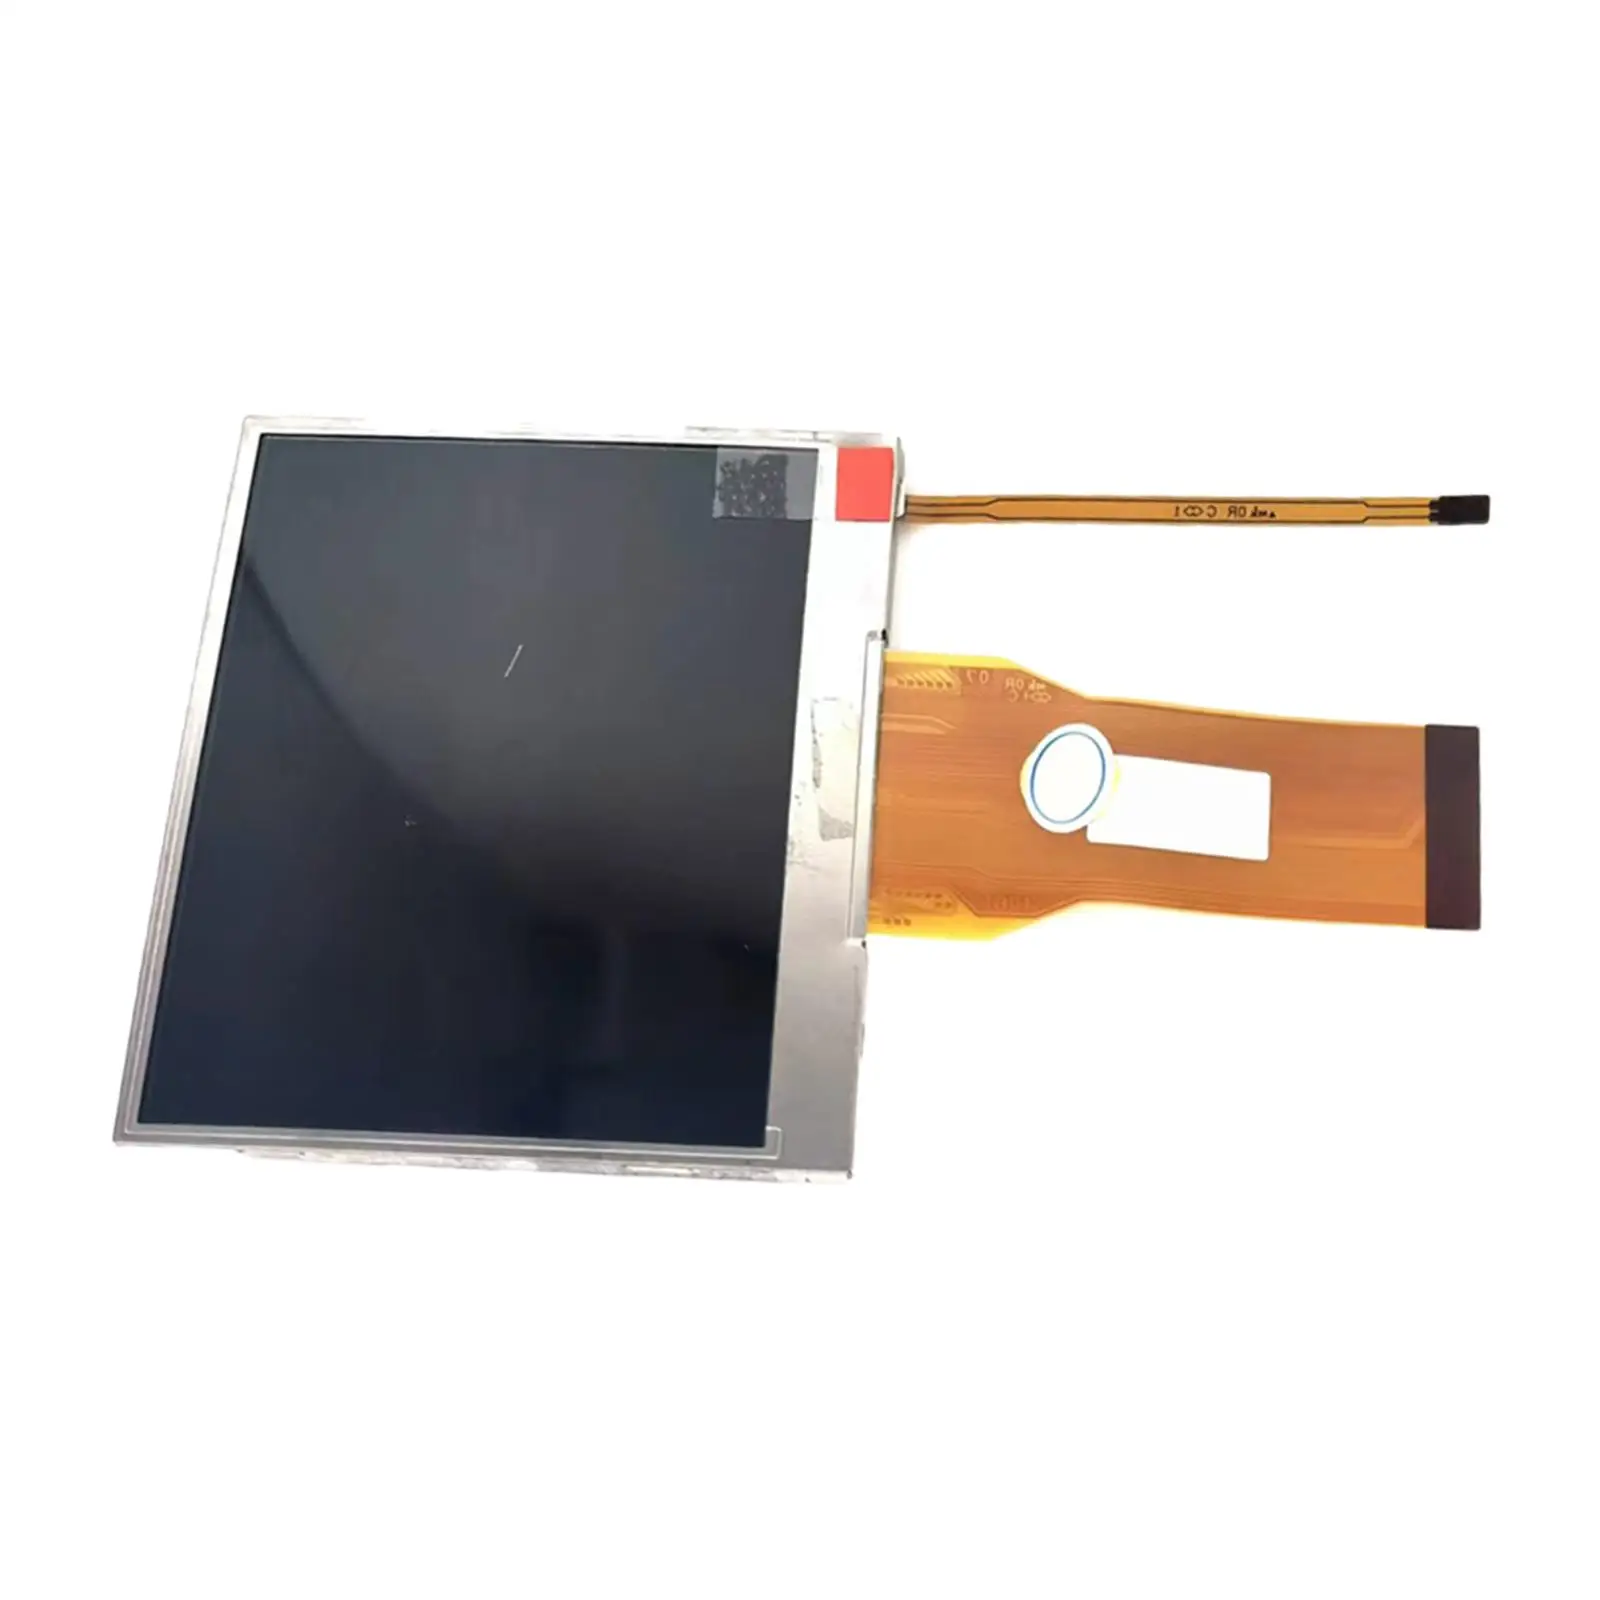 LCD Display Screen Replaces Digital Camera Repair Part Accessories Durable Easy Installation Professional LCD Screen for D7000